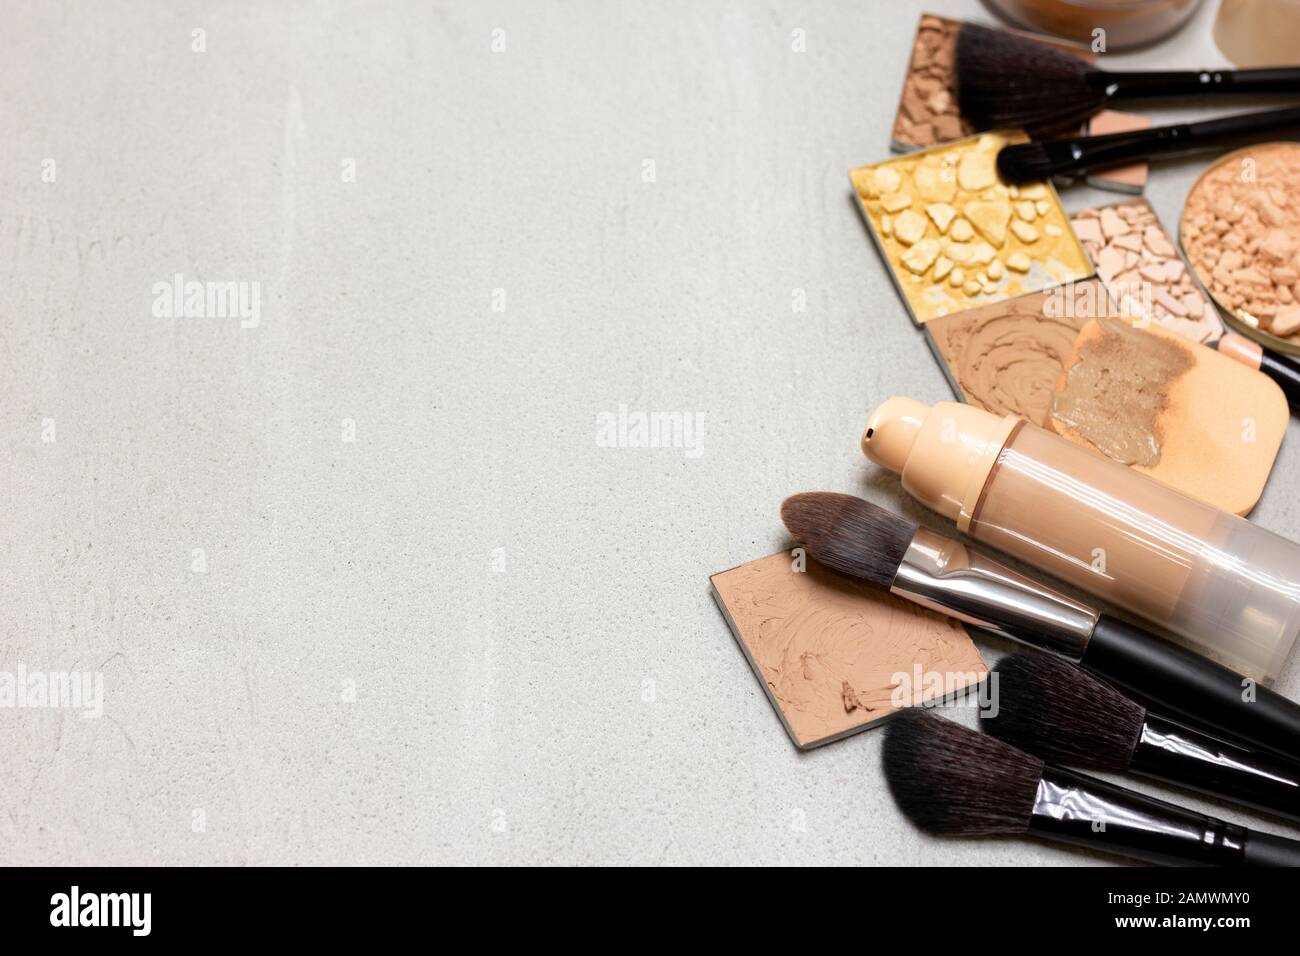 Makeup background. Make-up foundation, concealer, various powders on  concrete surface. Side frame layout with empty space Stock Photo - Alamy